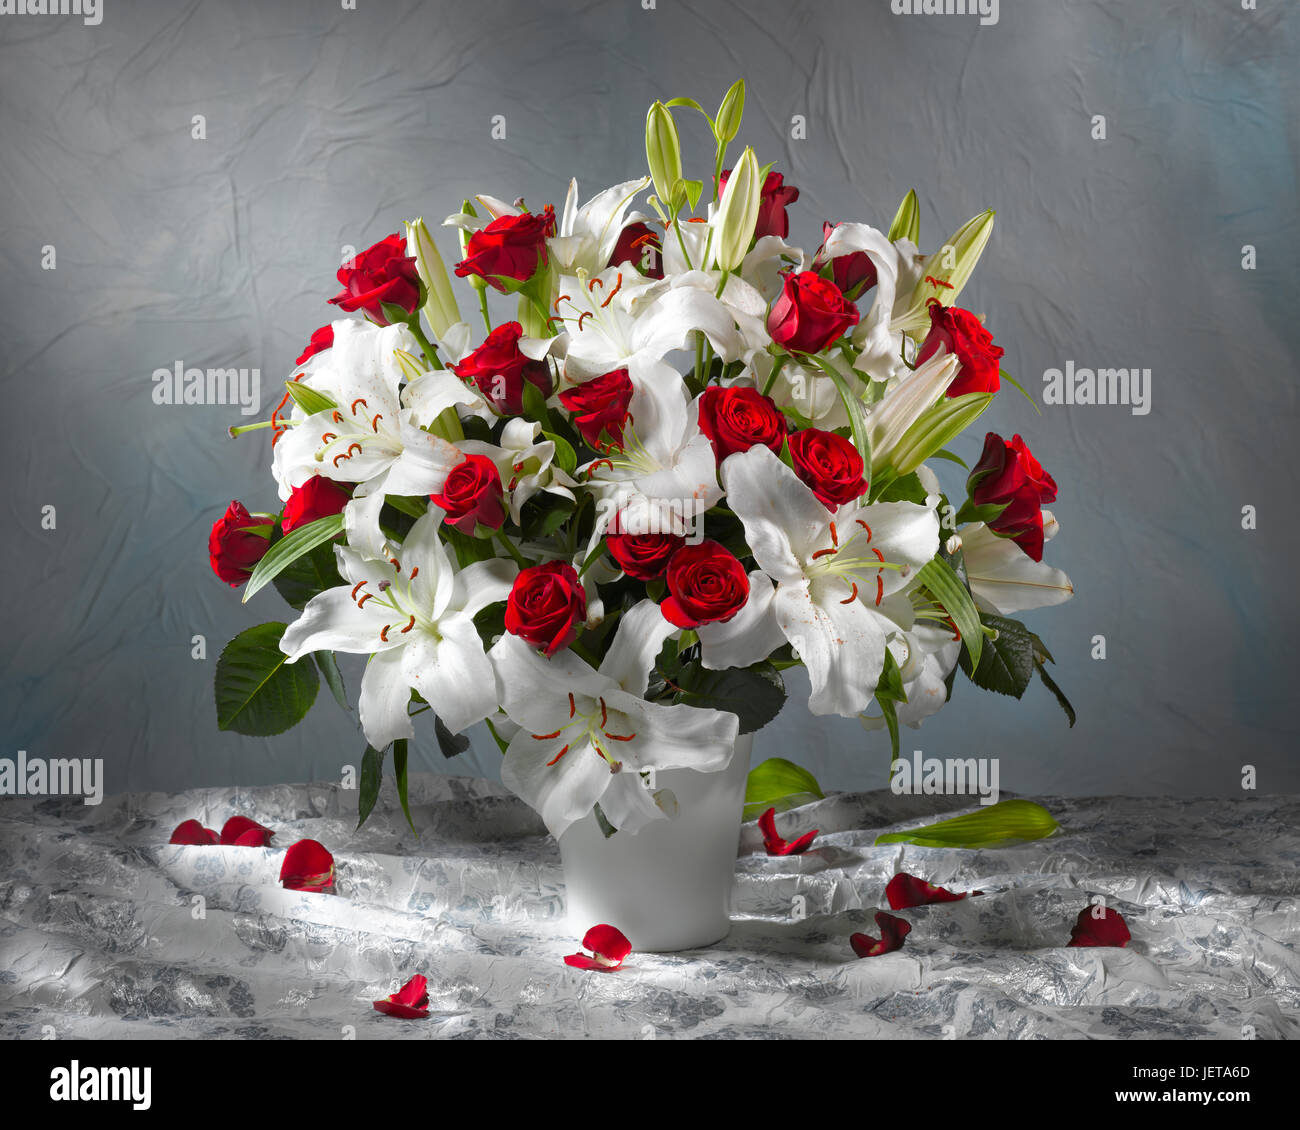 Bouquet of flowers with roses and lily. Stock Photo